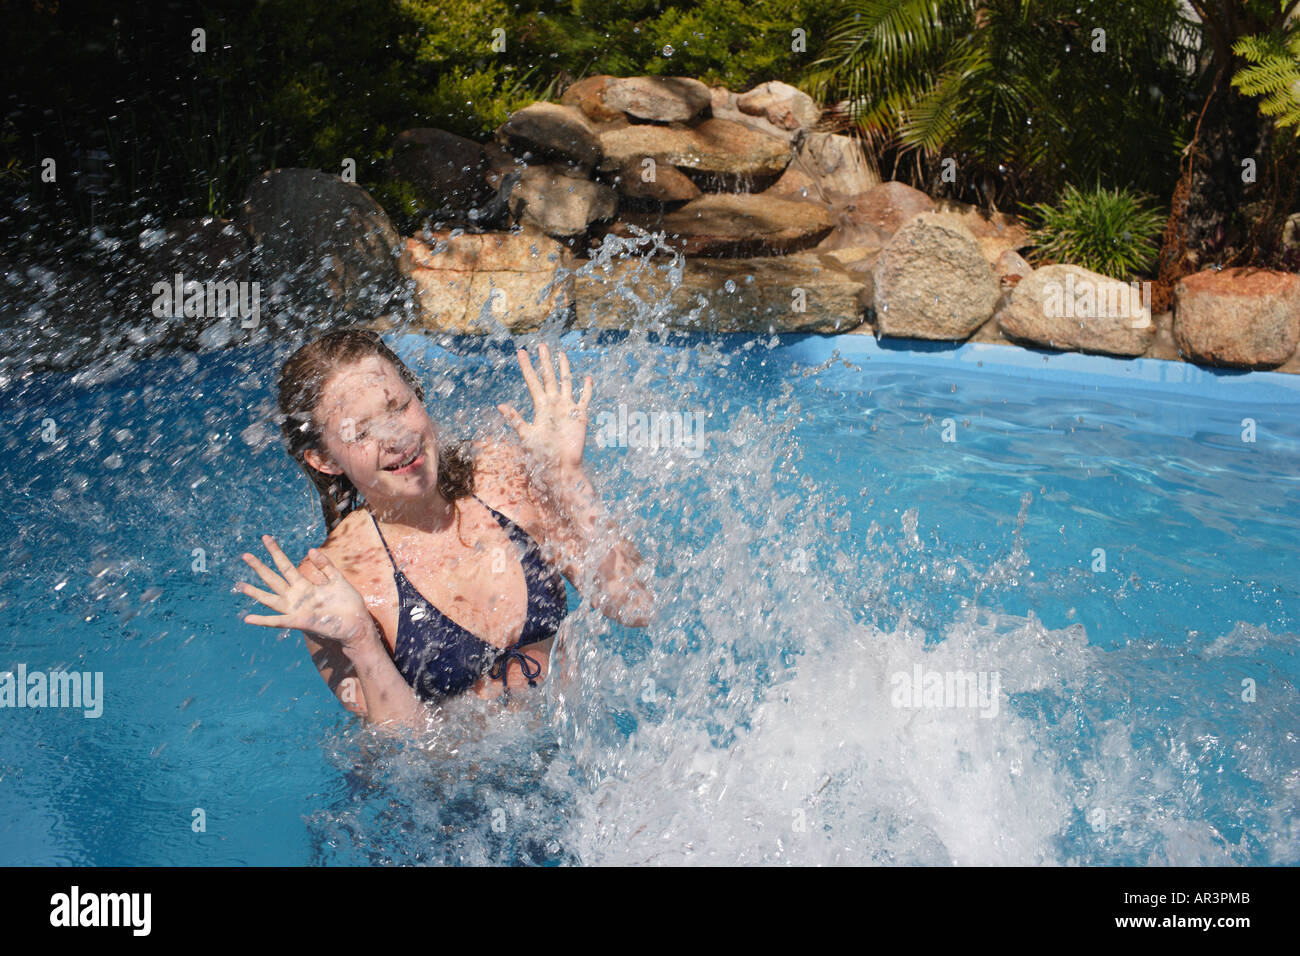 Young woman being splashed in outdoor swimming pool Stock Photo